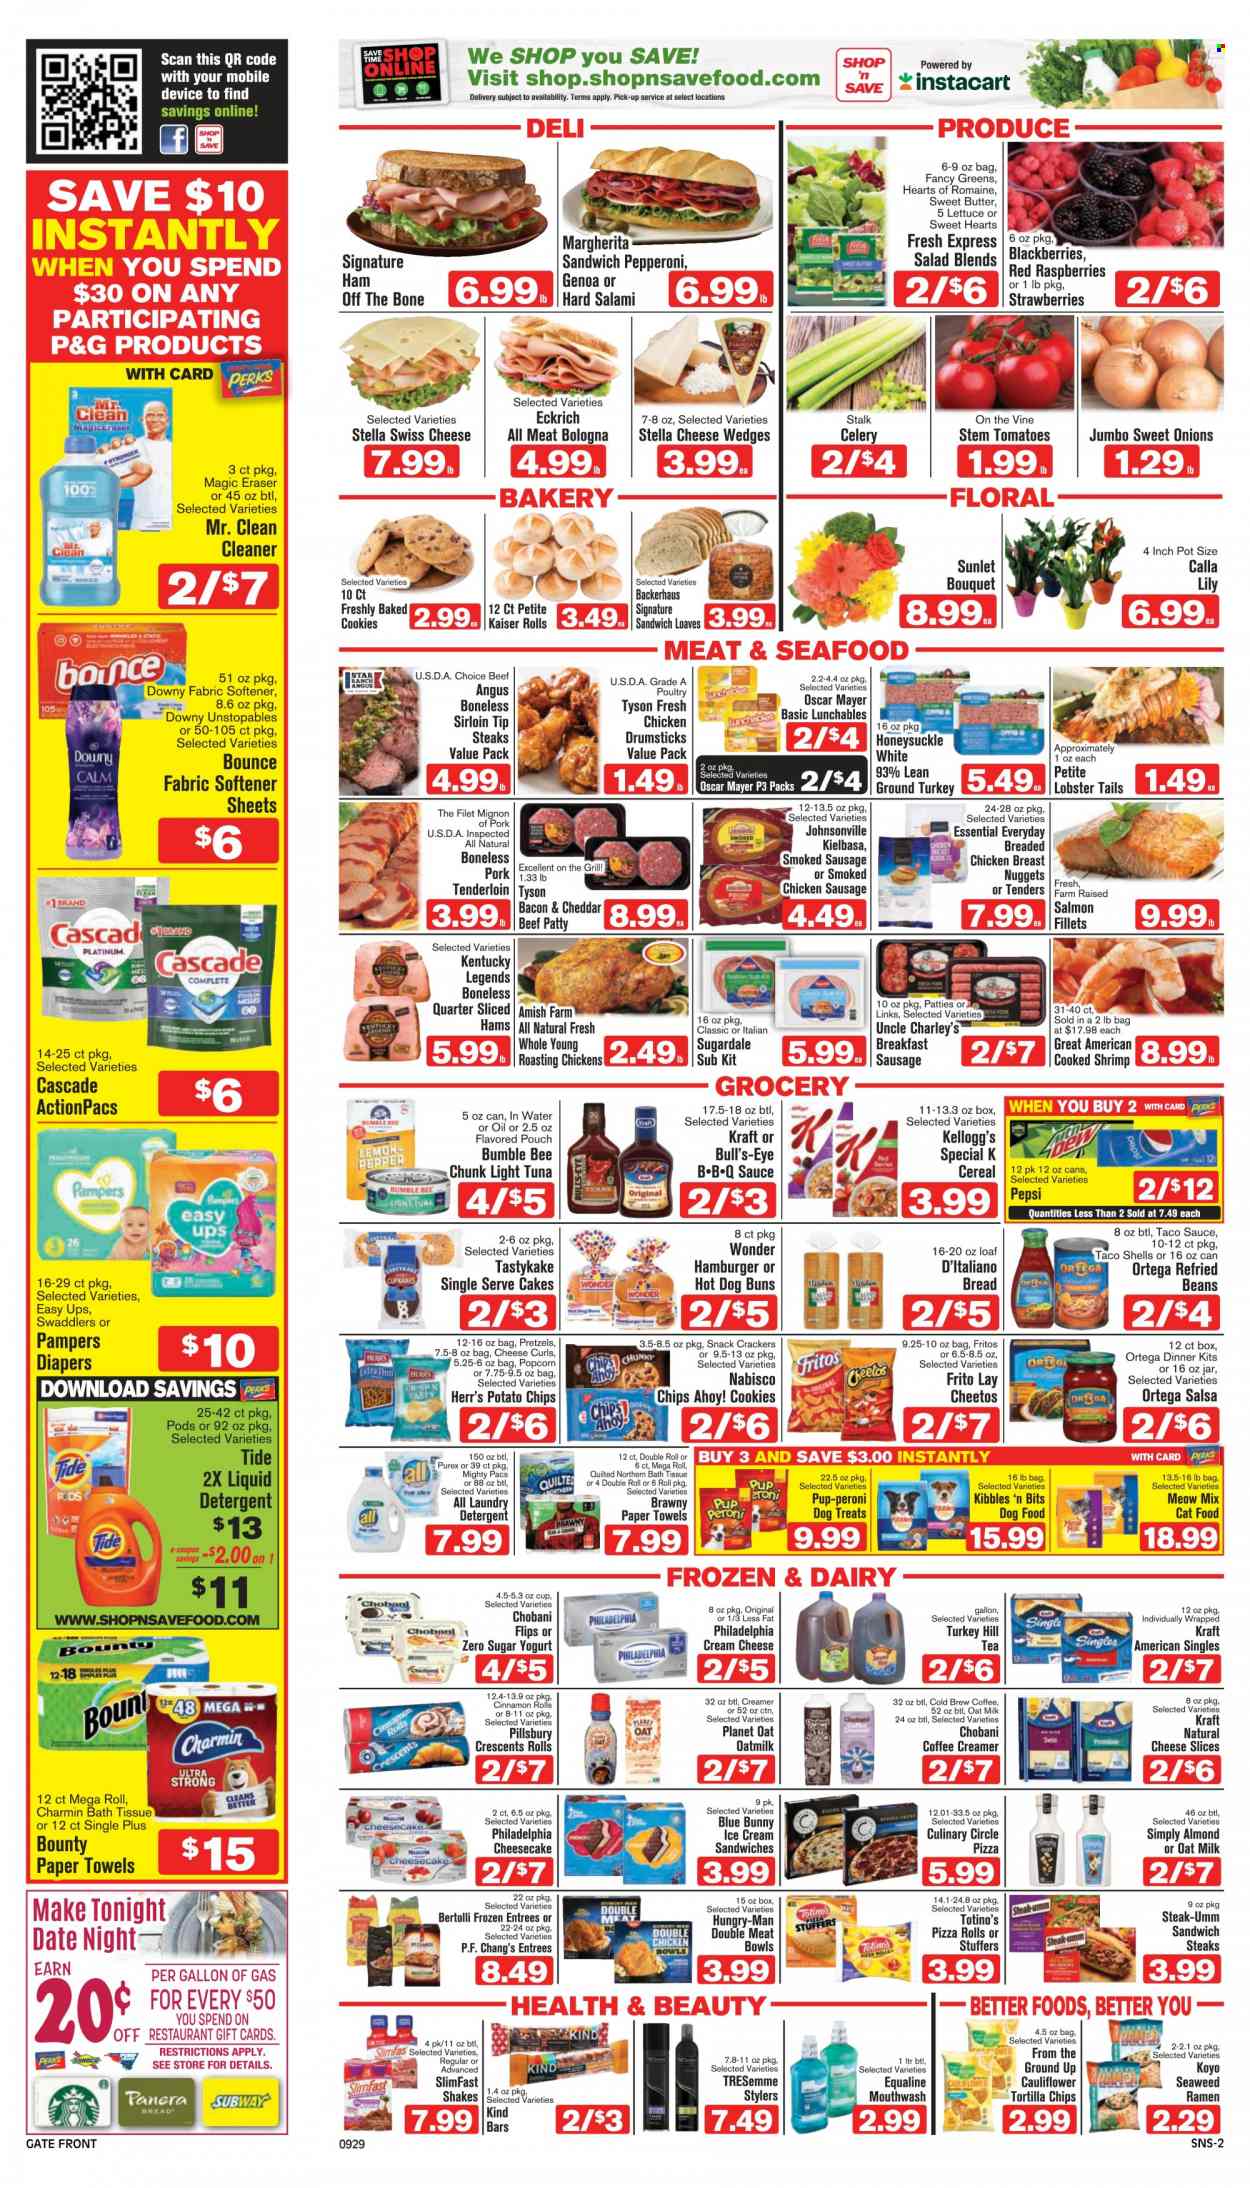 thumbnail - Shop ‘n Save Flyer - 09/29/2022 - 10/05/2022 - Sales products - bread, pretzels, cake, pizza rolls, buns, cinnamon roll, celery, lettuce, salad, strawberries, ground turkey, chicken drumsticks, steak, beef tenderloin, Johnsonville, lobster, lobster tail, shrimps, ramen, pizza, nuggets, Bumble Bee, fried chicken, Pillsbury, chicken nuggets, dinner kit, Slimfast, Lunchables, Kraft®, Bertolli, Sugardale, bacon, salami, Oscar Mayer, sausage, smoked sausage, pepperoni, chicken sausage, kielbasa, cream cheese, sliced cheese, swiss cheese, Philadelphia, Kraft Singles, Provolone, yoghurt, Chobani, milk, shake, oat milk, butter, creamer, ice cream, ice cream sandwich, Blue Bunny, cookies, snack, Bounty, crackers, Kellogg's, Chips Ahoy!, Fritos, tortilla chips, potato chips, Cheetos, popcorn, seaweed, refried beans, light tuna, cereals, taco sauce, salsa, Pepsi, tea, bath tissue, Quilted Northern, kitchen towels, paper towels, Charmin, detergent, cleaner, Cascade, Tide, Unstopables, fabric softener, liquid detergent, laundry detergent, Bounce, Purex, Downy Laundry, WAVE, mouthwash, TRESemmé, animal food, cat food, dog food, Pup-Peroni, Meow Mix. Page 2.